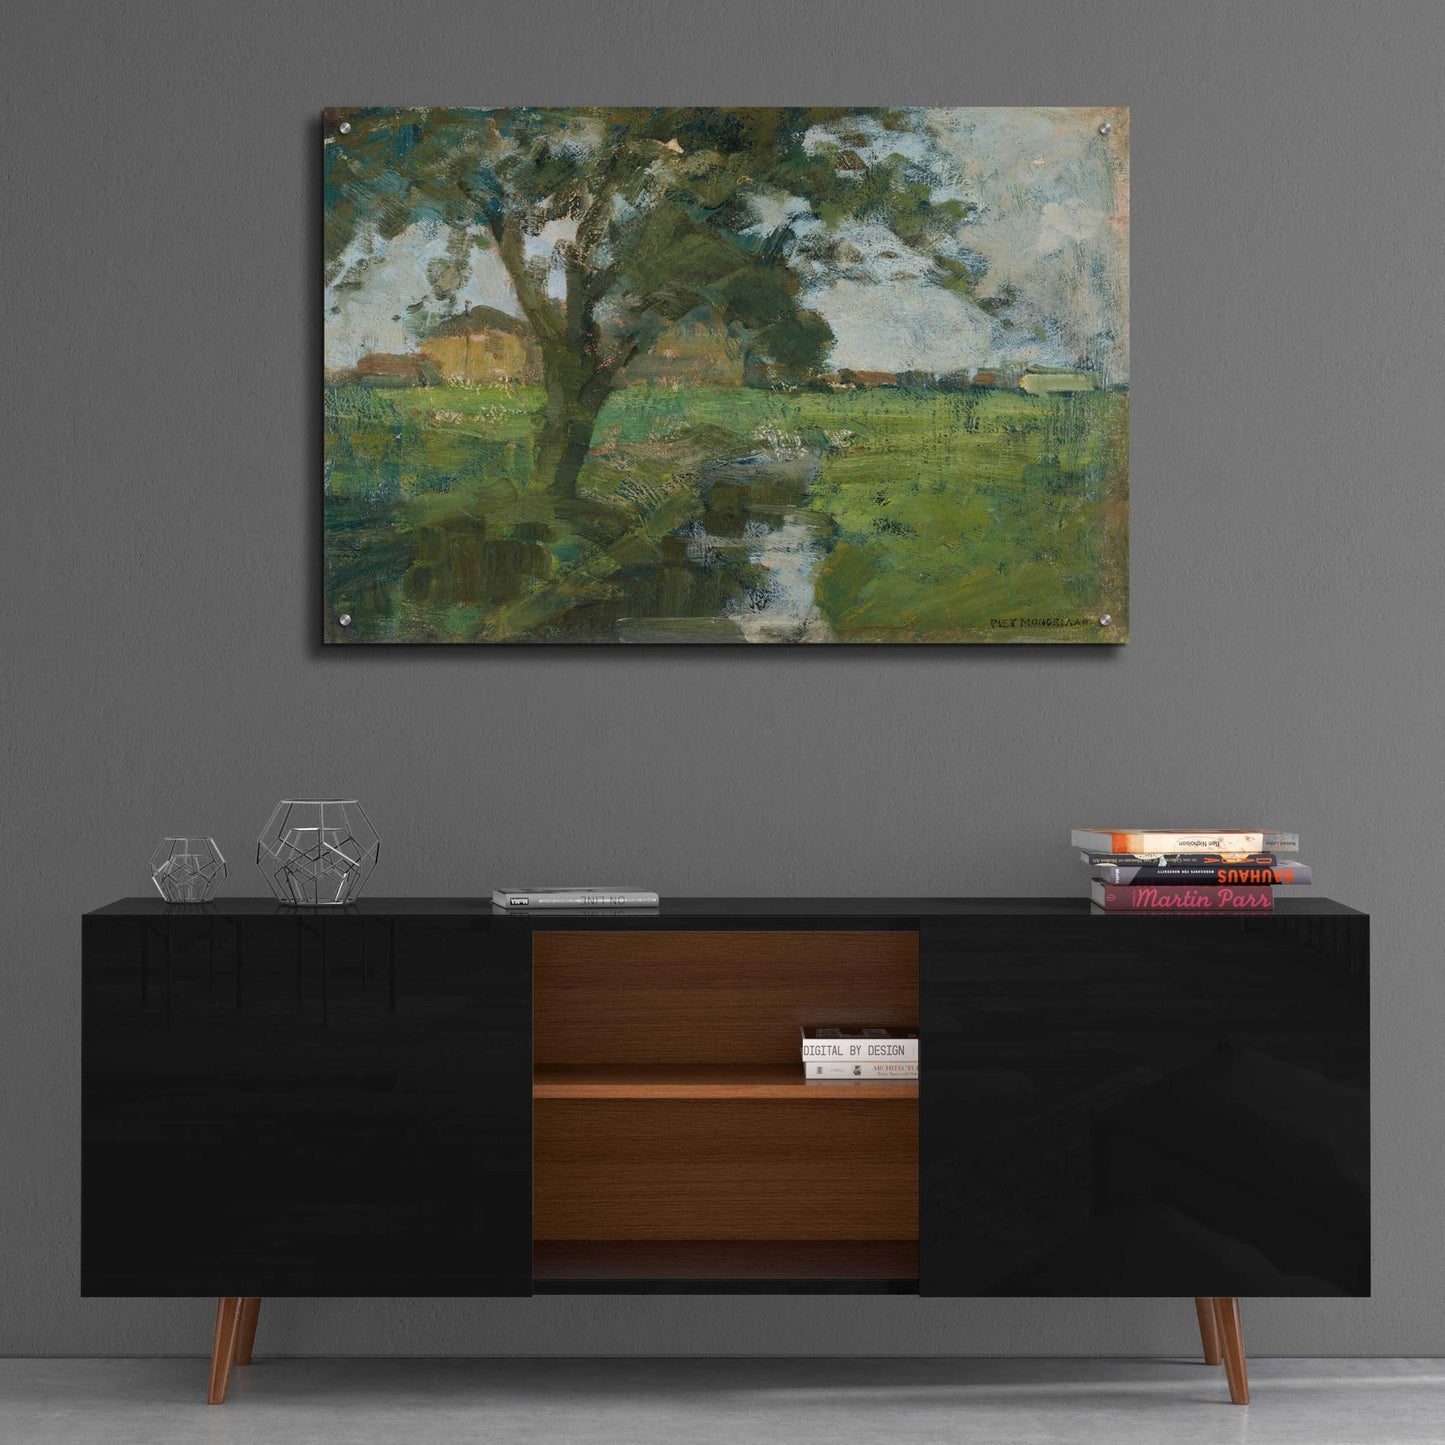 Epic Art 'Farm Settin with Foreground tree and Irrigation Ditch, 1900' by Piet Mondrian, Acrylic Glass Wall Art,36x24